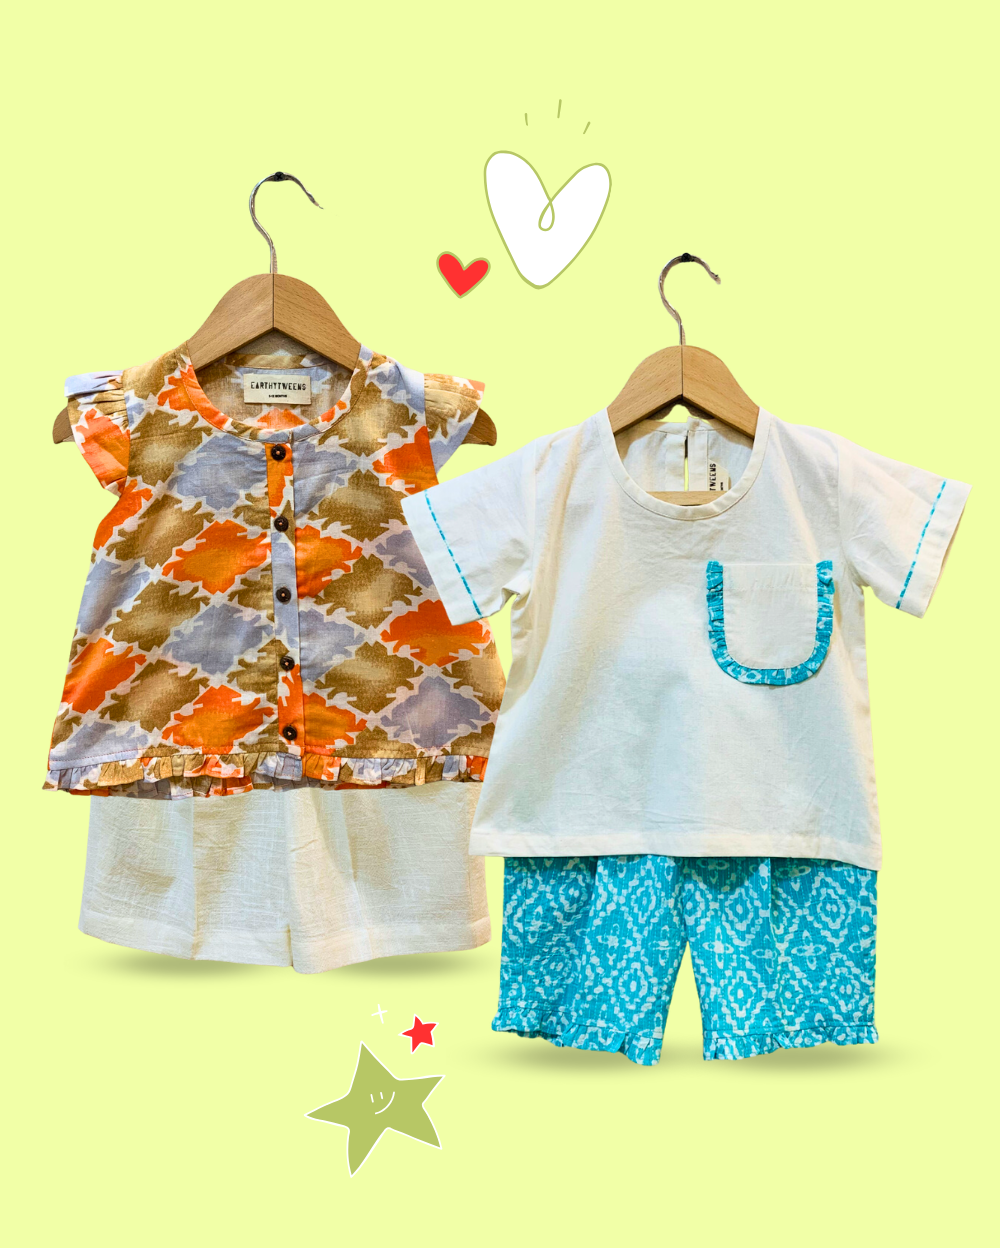 100% Natural Cotton Baby Sets for Baby Girl - 2 Piece Set